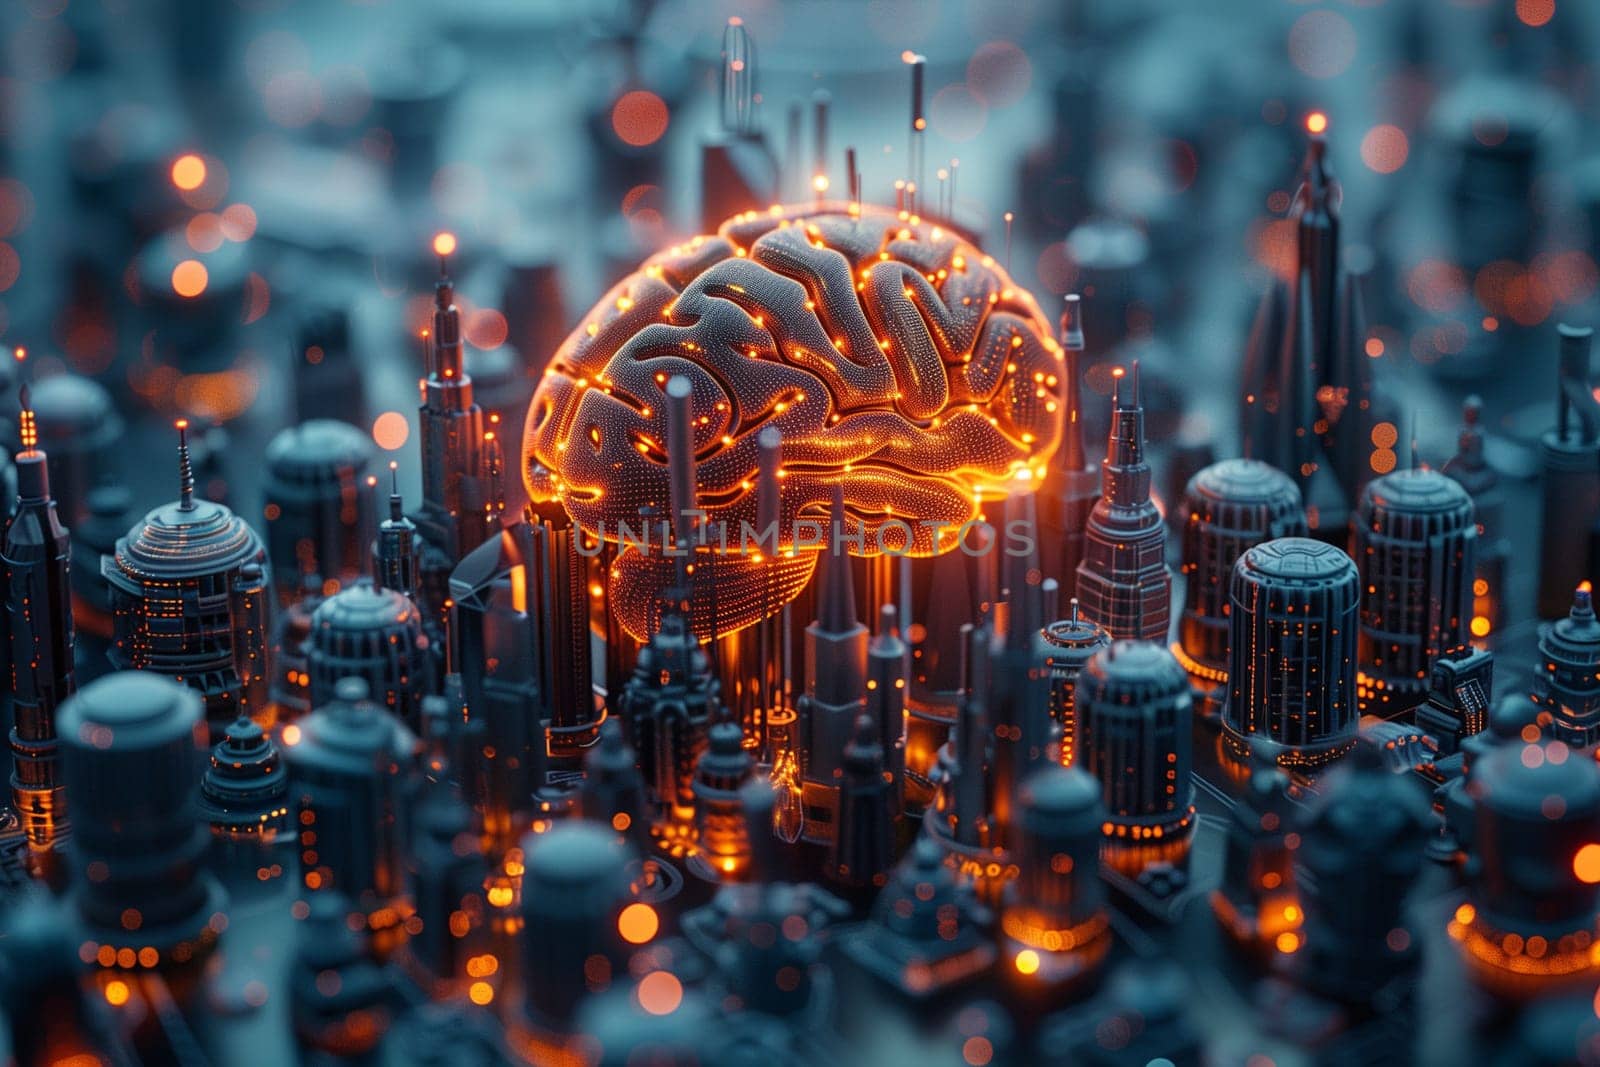 A computer-generated brain symbol surrounded by towering buildings, illustrating the juxtaposition of nature and urban development.